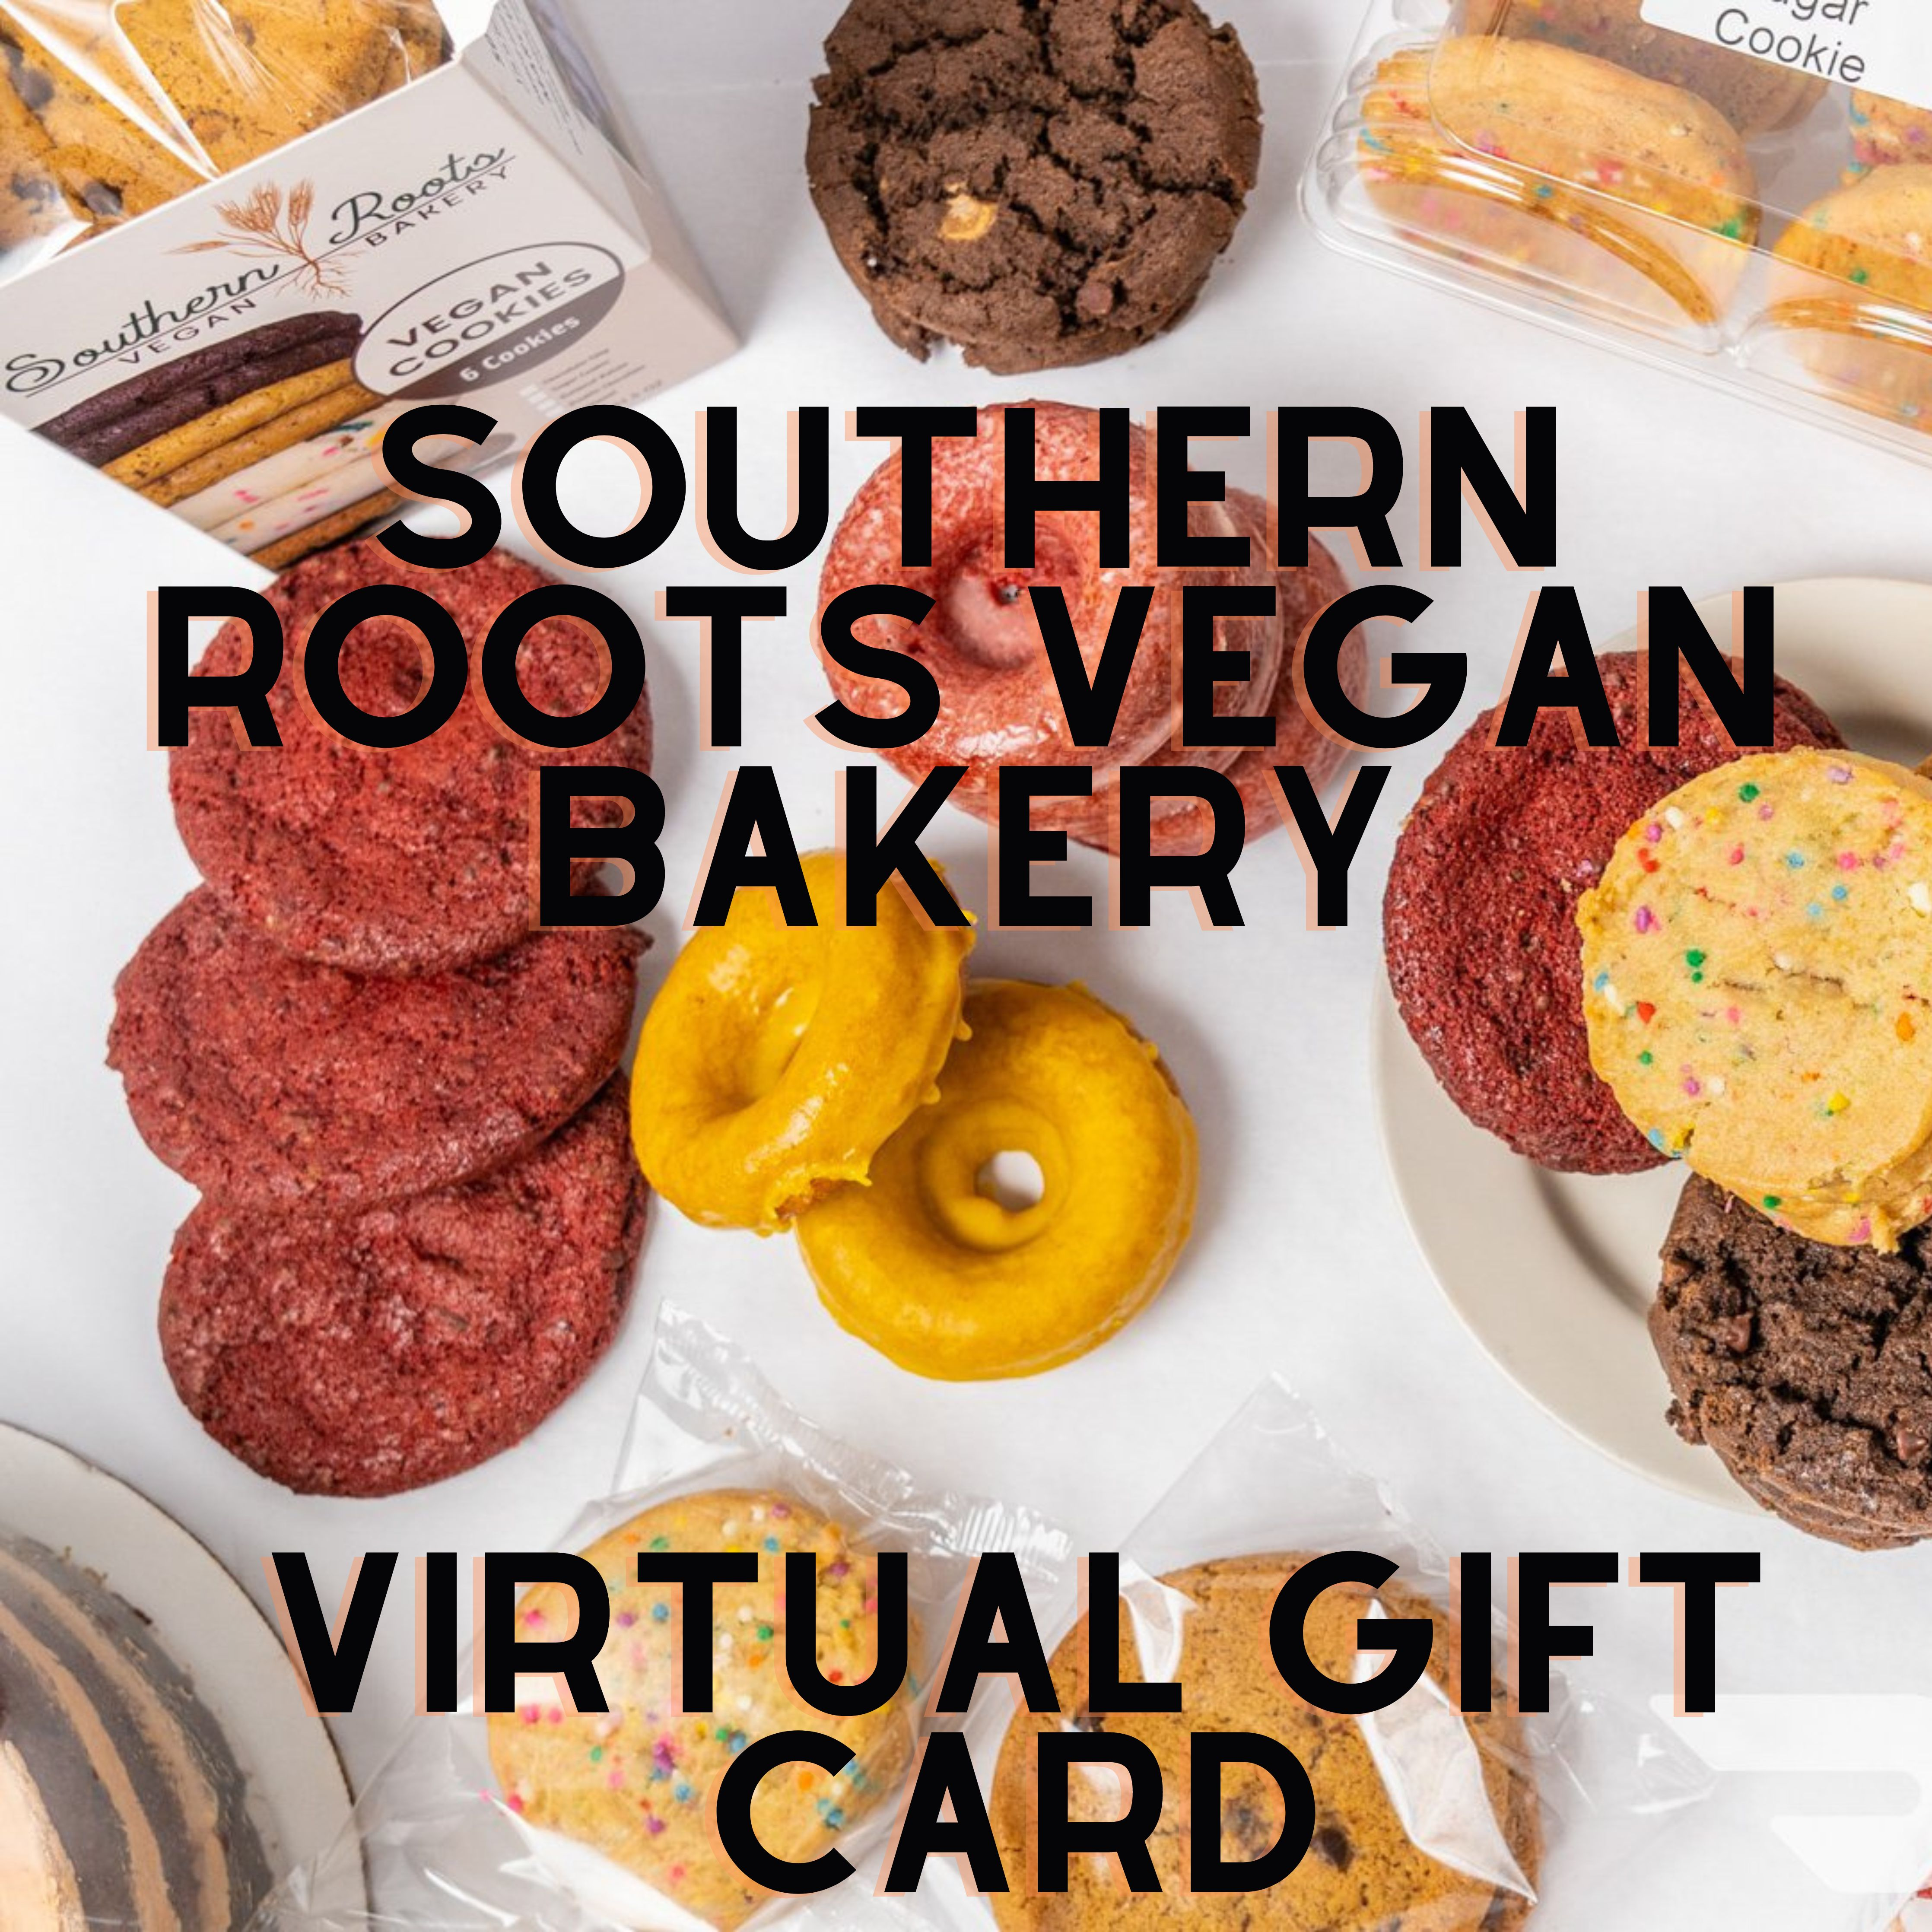 Gift Cards - Southern Roots Vegan Bakery